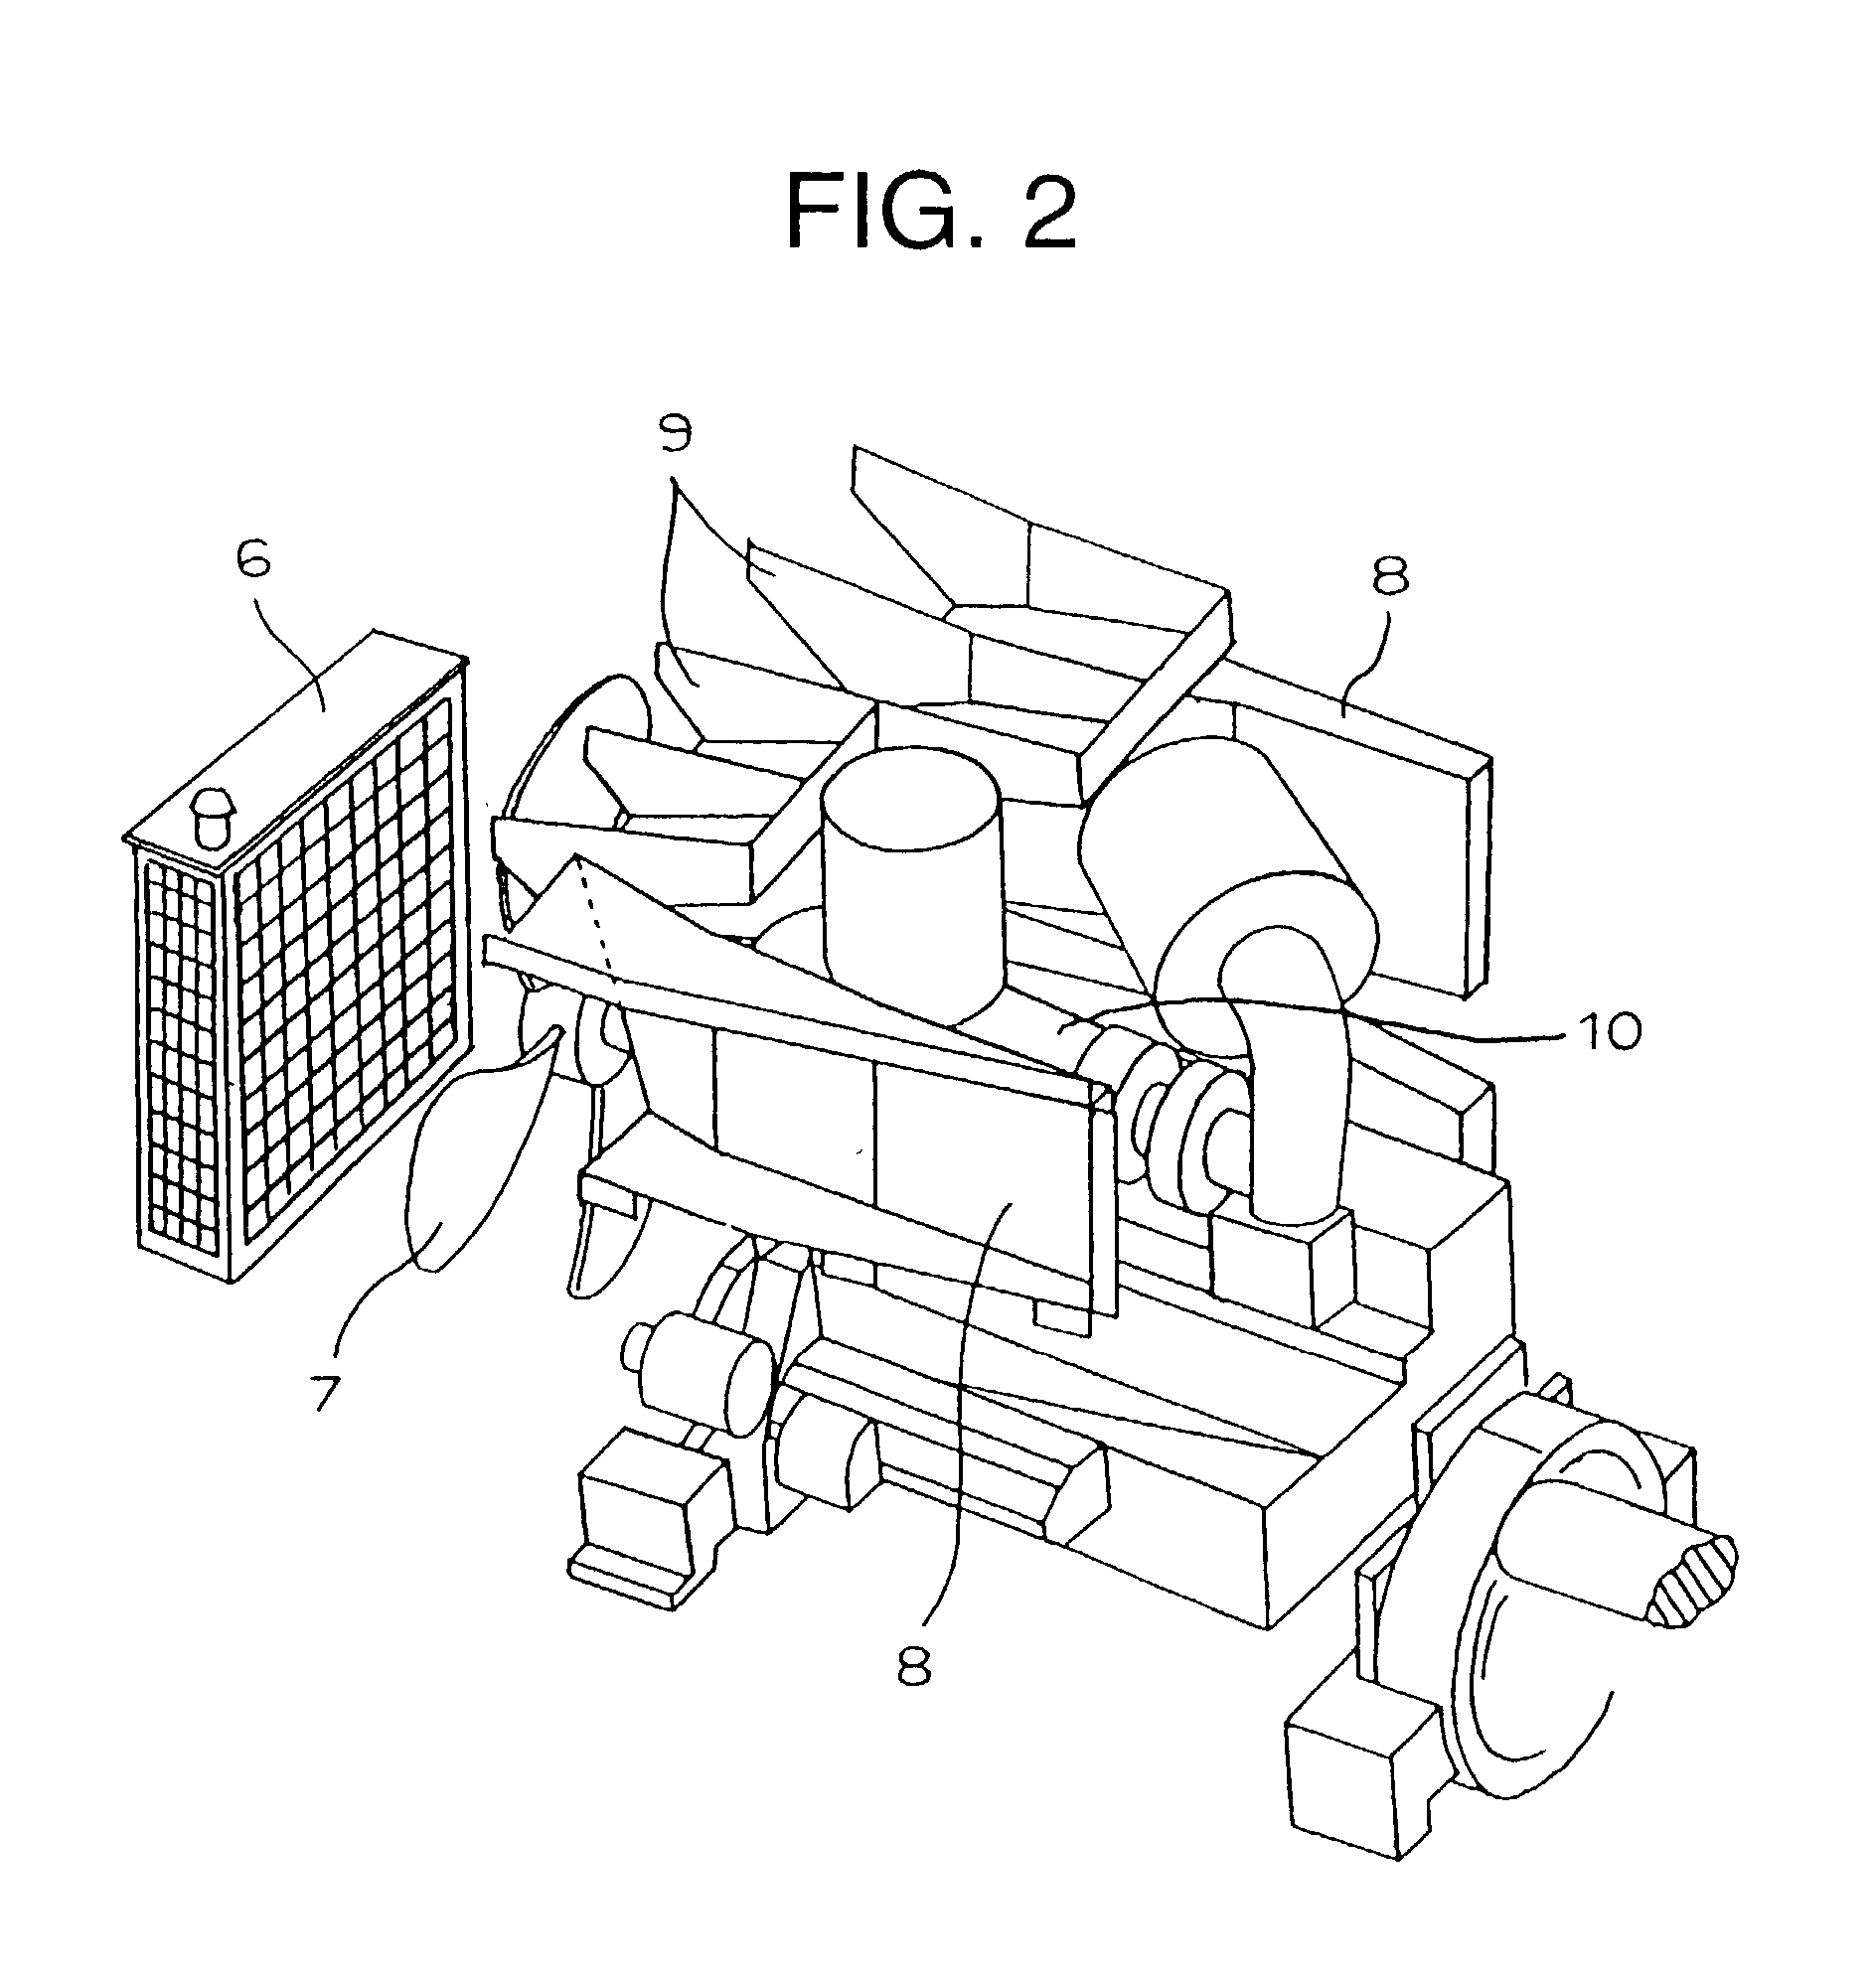 Engine compartment structure of a work machine